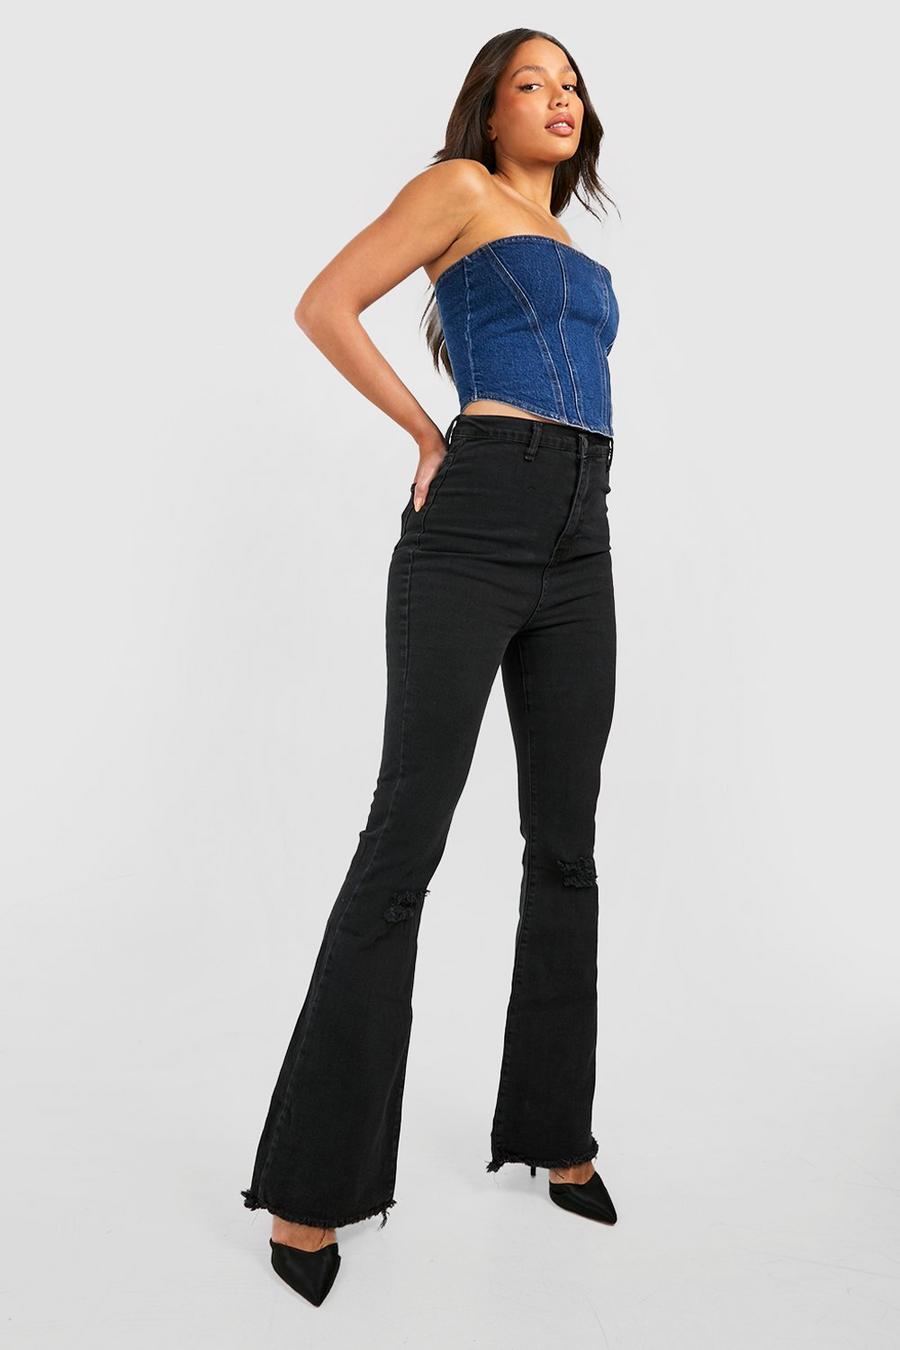 Black negro Tall High Waist Ripped Stretch Flare Jeans